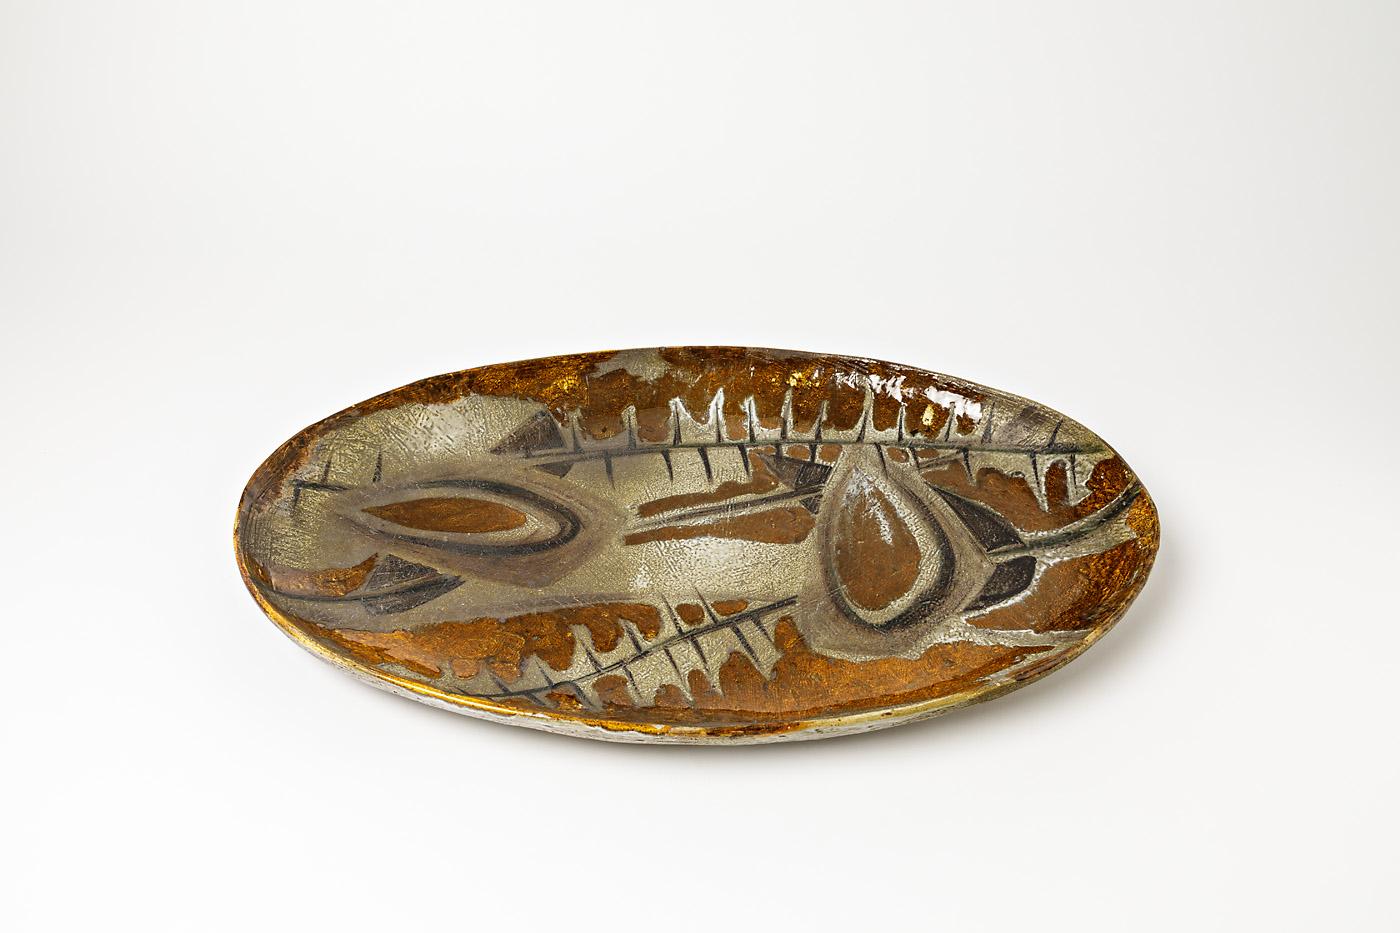 Beaux Arts Exceptionnal Ceramic Dish by Atelier Madoura, ‘Style of Picasso’, circa 1960